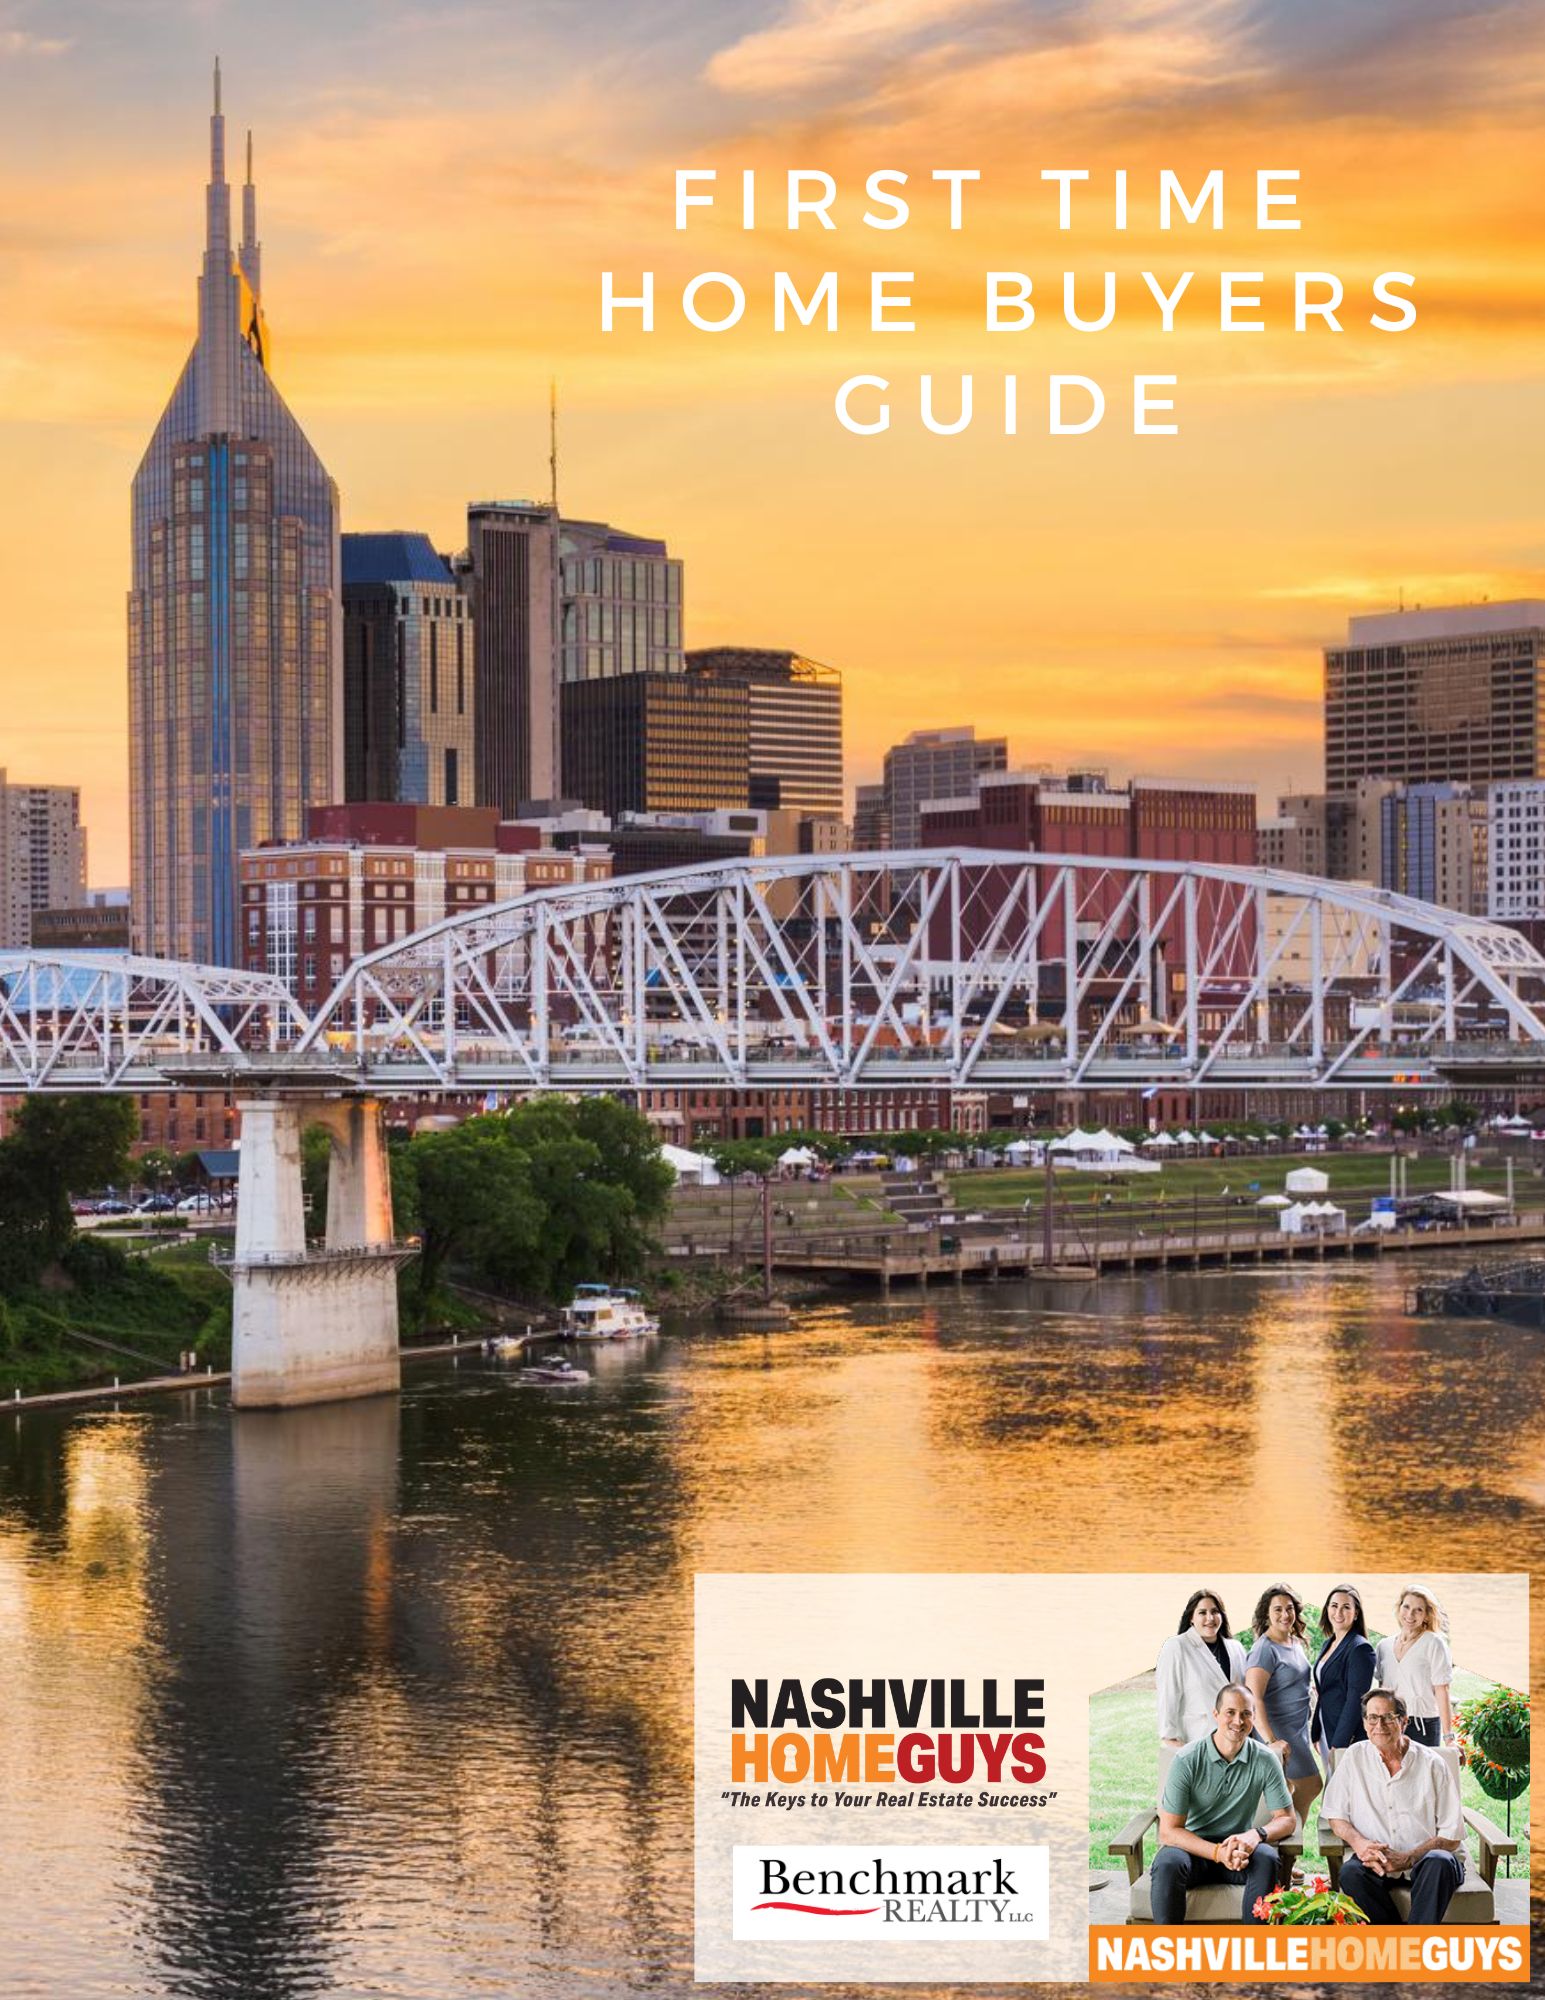 Nashville Home Guys Buyers Guide